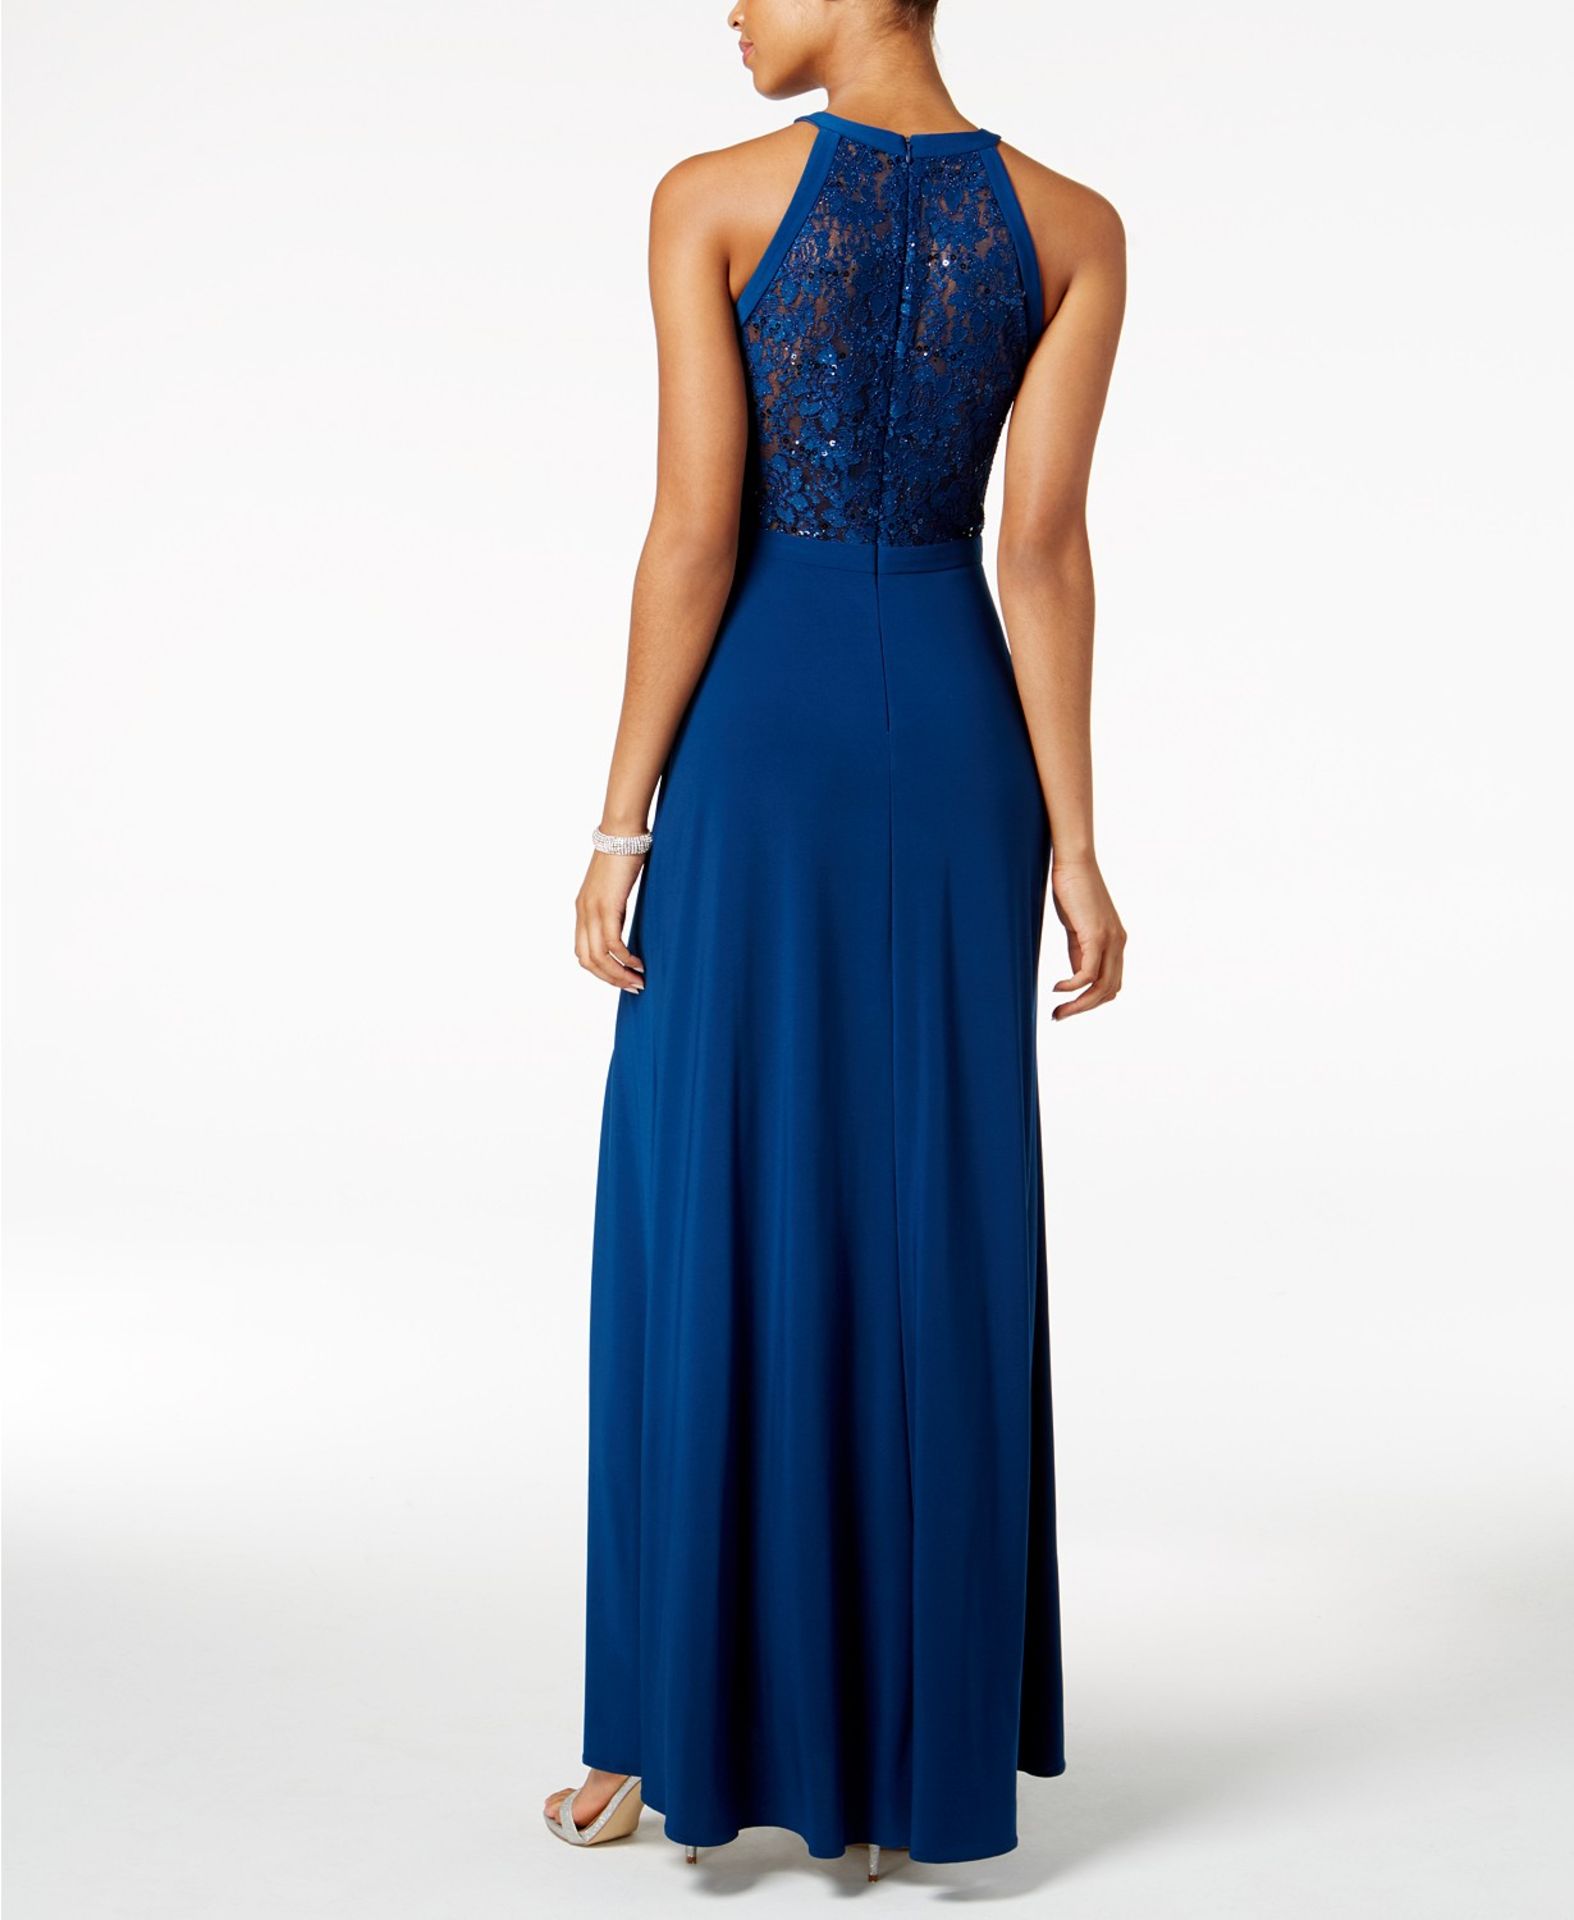 Nightway Lace Halter Gown Colour Peacock Rrp £108 Size 14 - Image 2 of 2